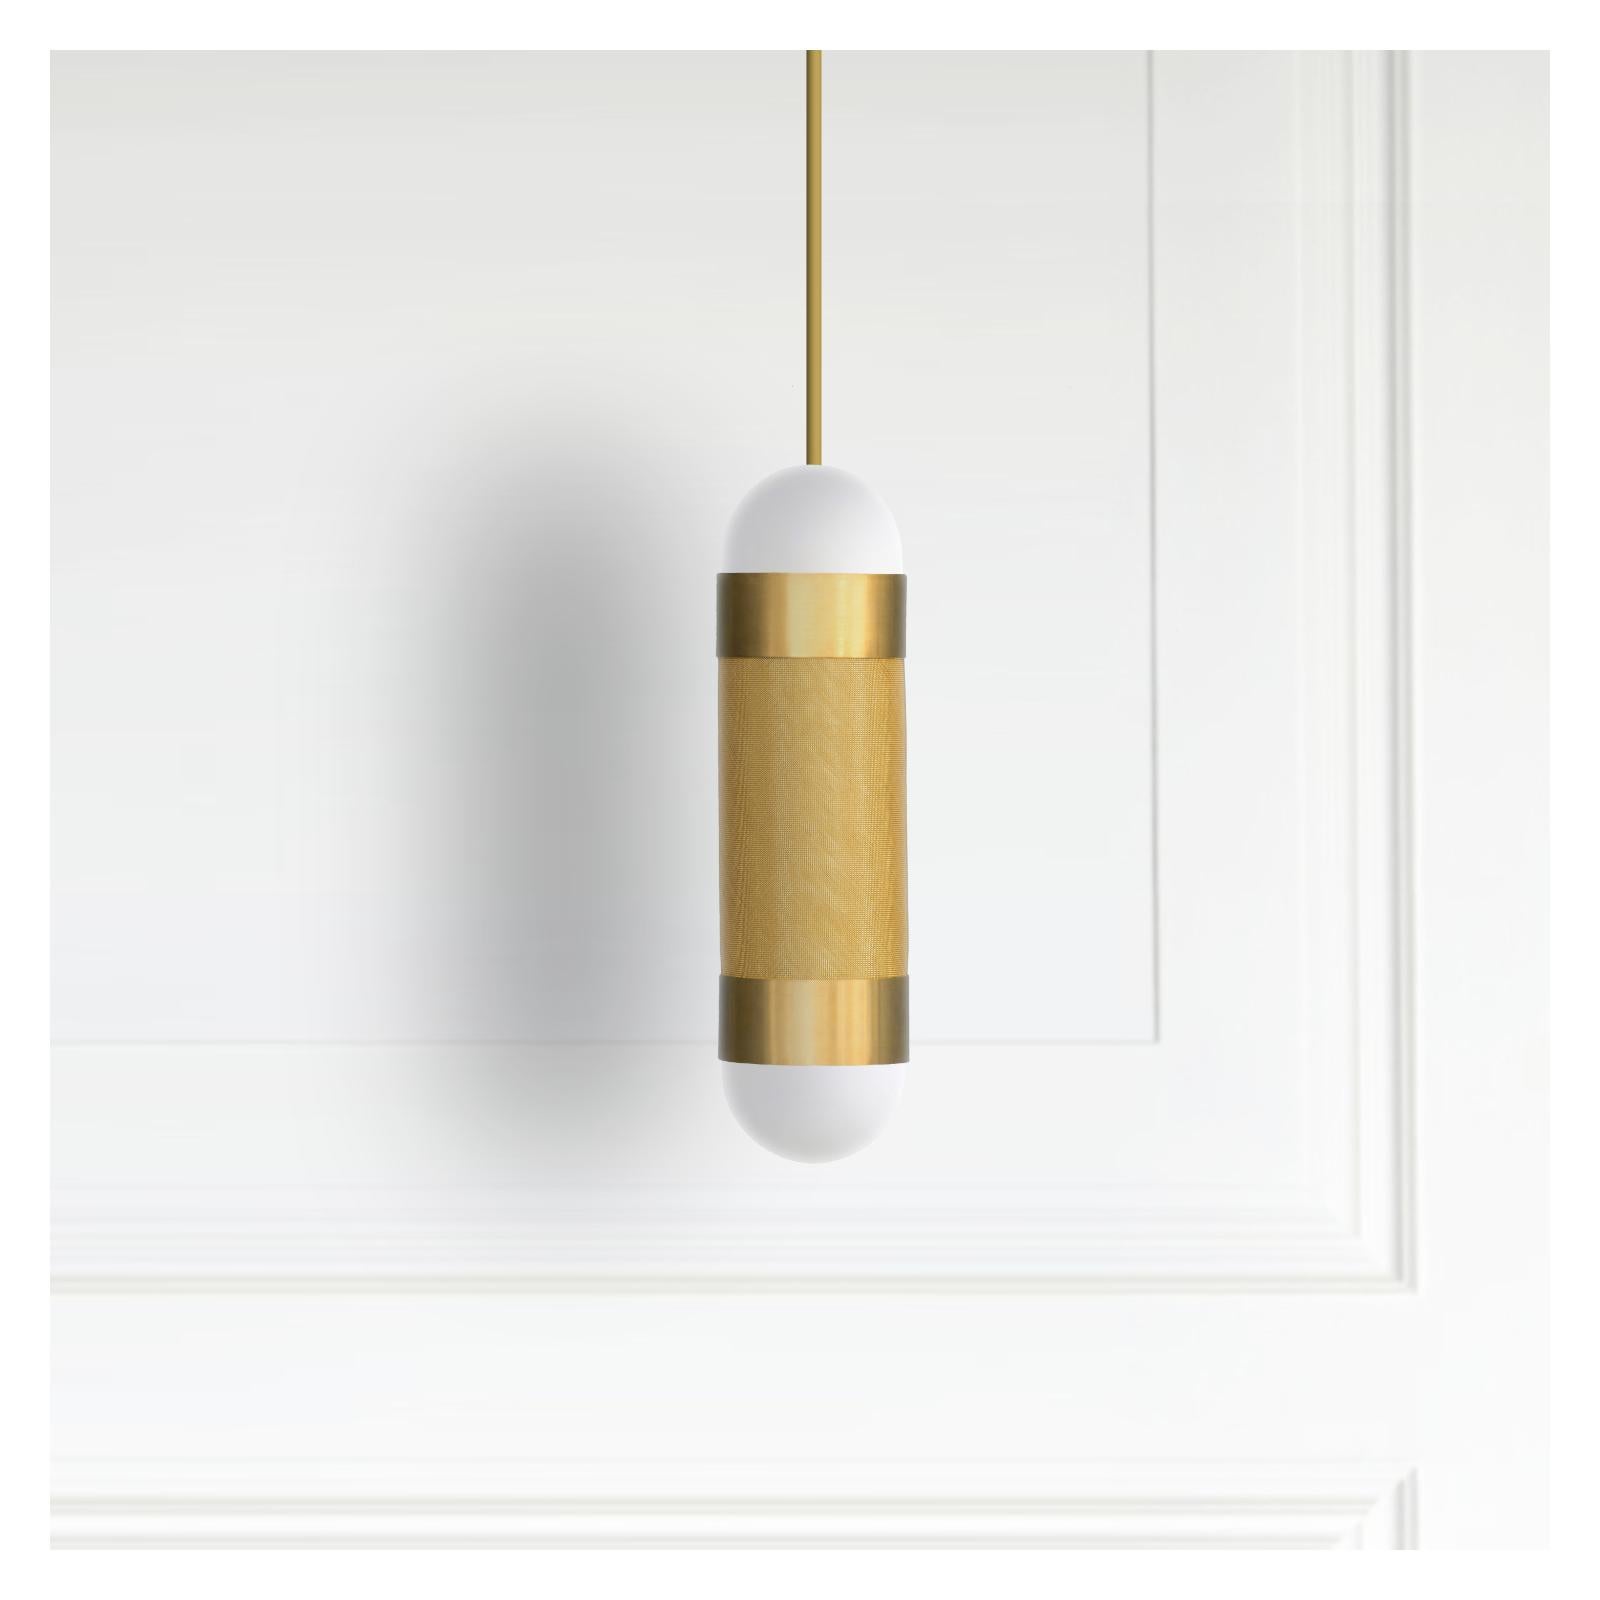 The LOOM pendant light is defined by its signature woven brass cylinder topped with hand-brushed brass sleeves and completed with soft-white borosilicate glass domes. When illuminated the LOOM emanates a soft, warm glow through the brass weave,